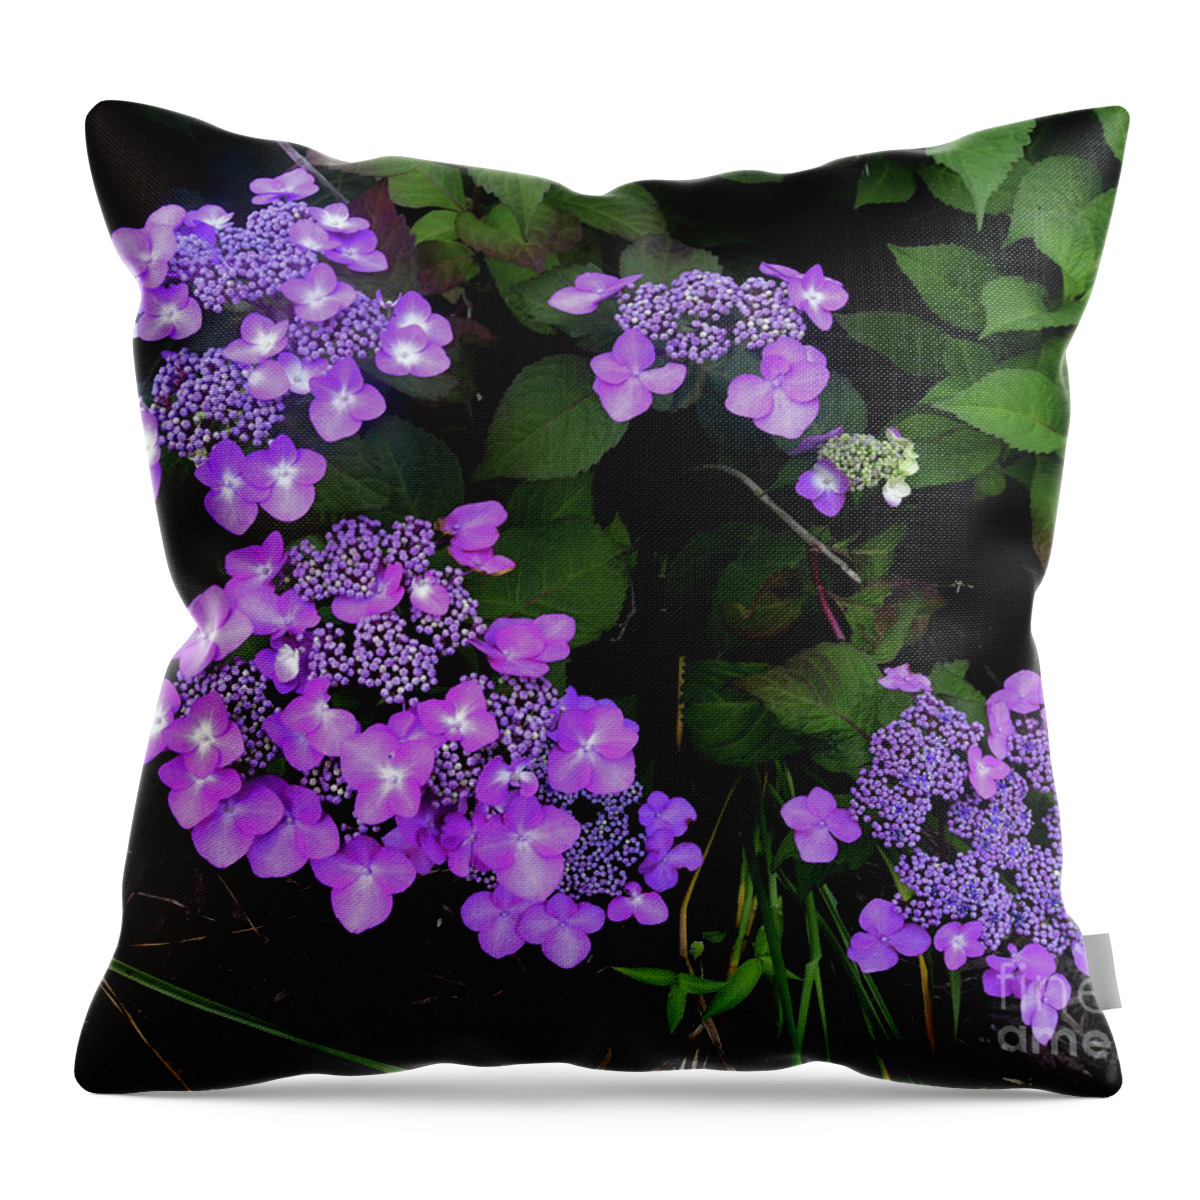 Purple Throw Pillow featuring the photograph Hydrangea Flowers by Scott Cameron